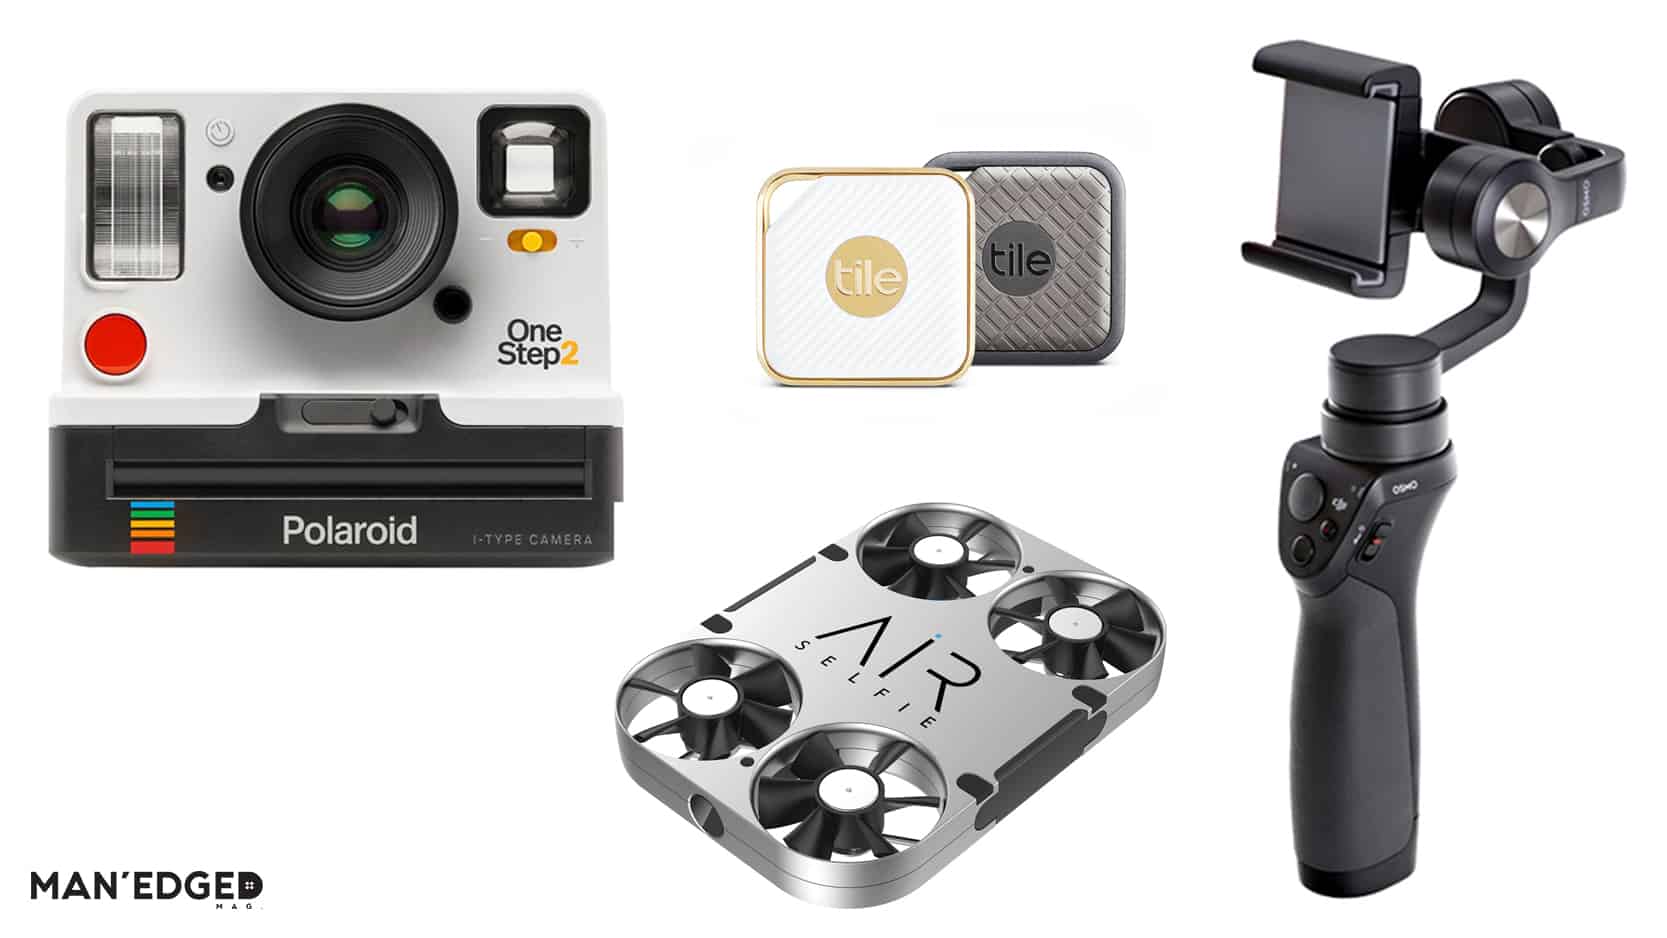 Tech gifts in MAN'edged Magazine's best gift ideas for the tech guy